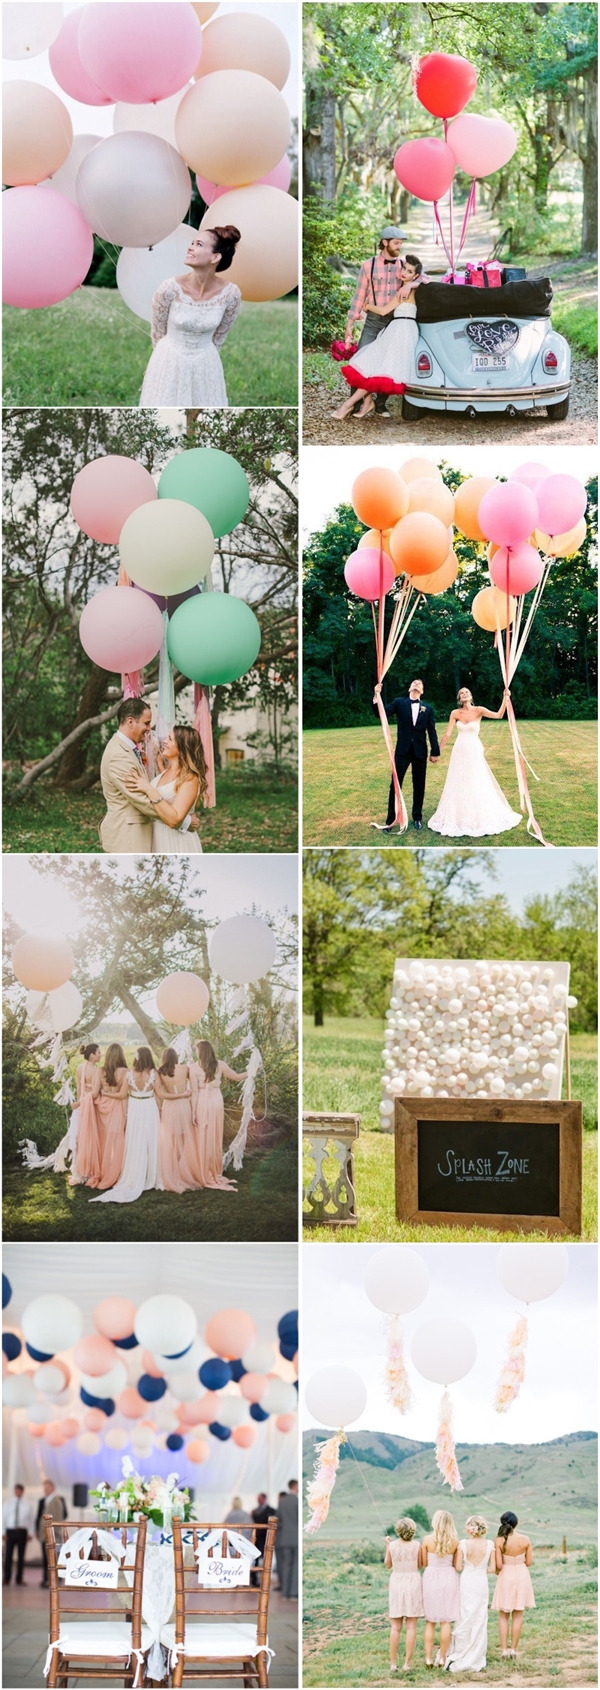 simple unique wedding ideas with giant ballons